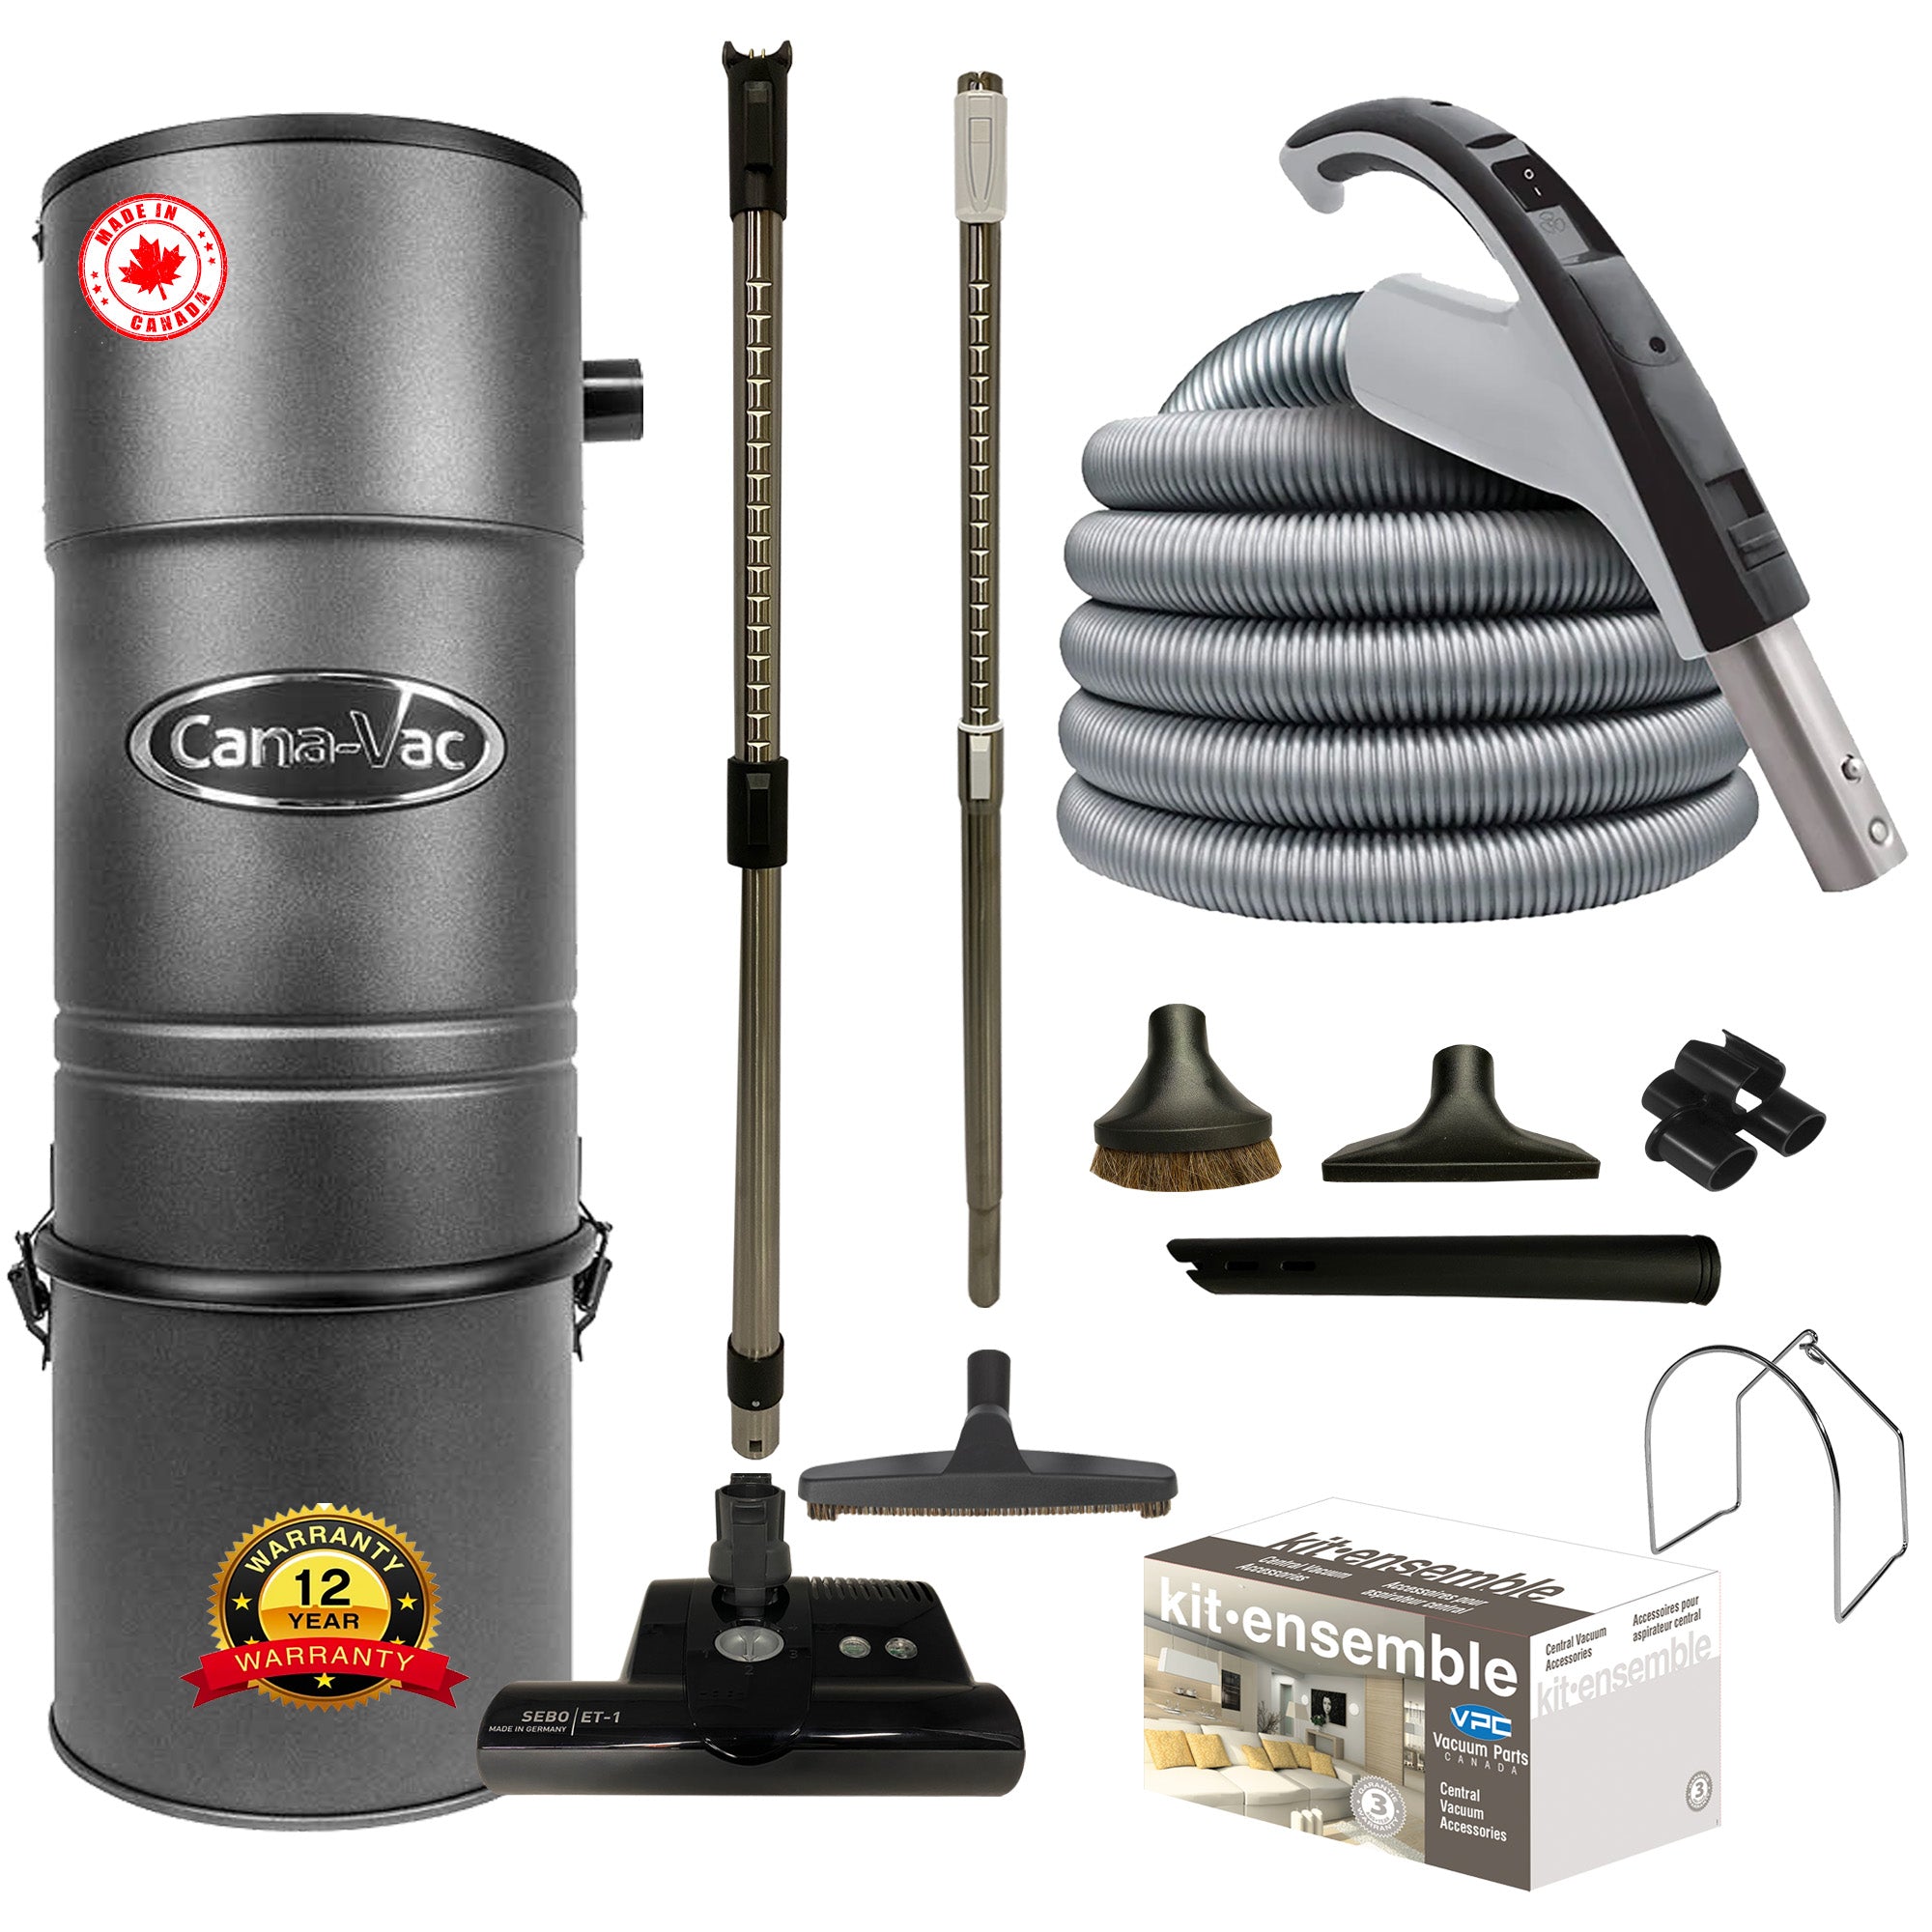 CanaVac CV787 Central Vacuum Cleaner with Premium Electric Package